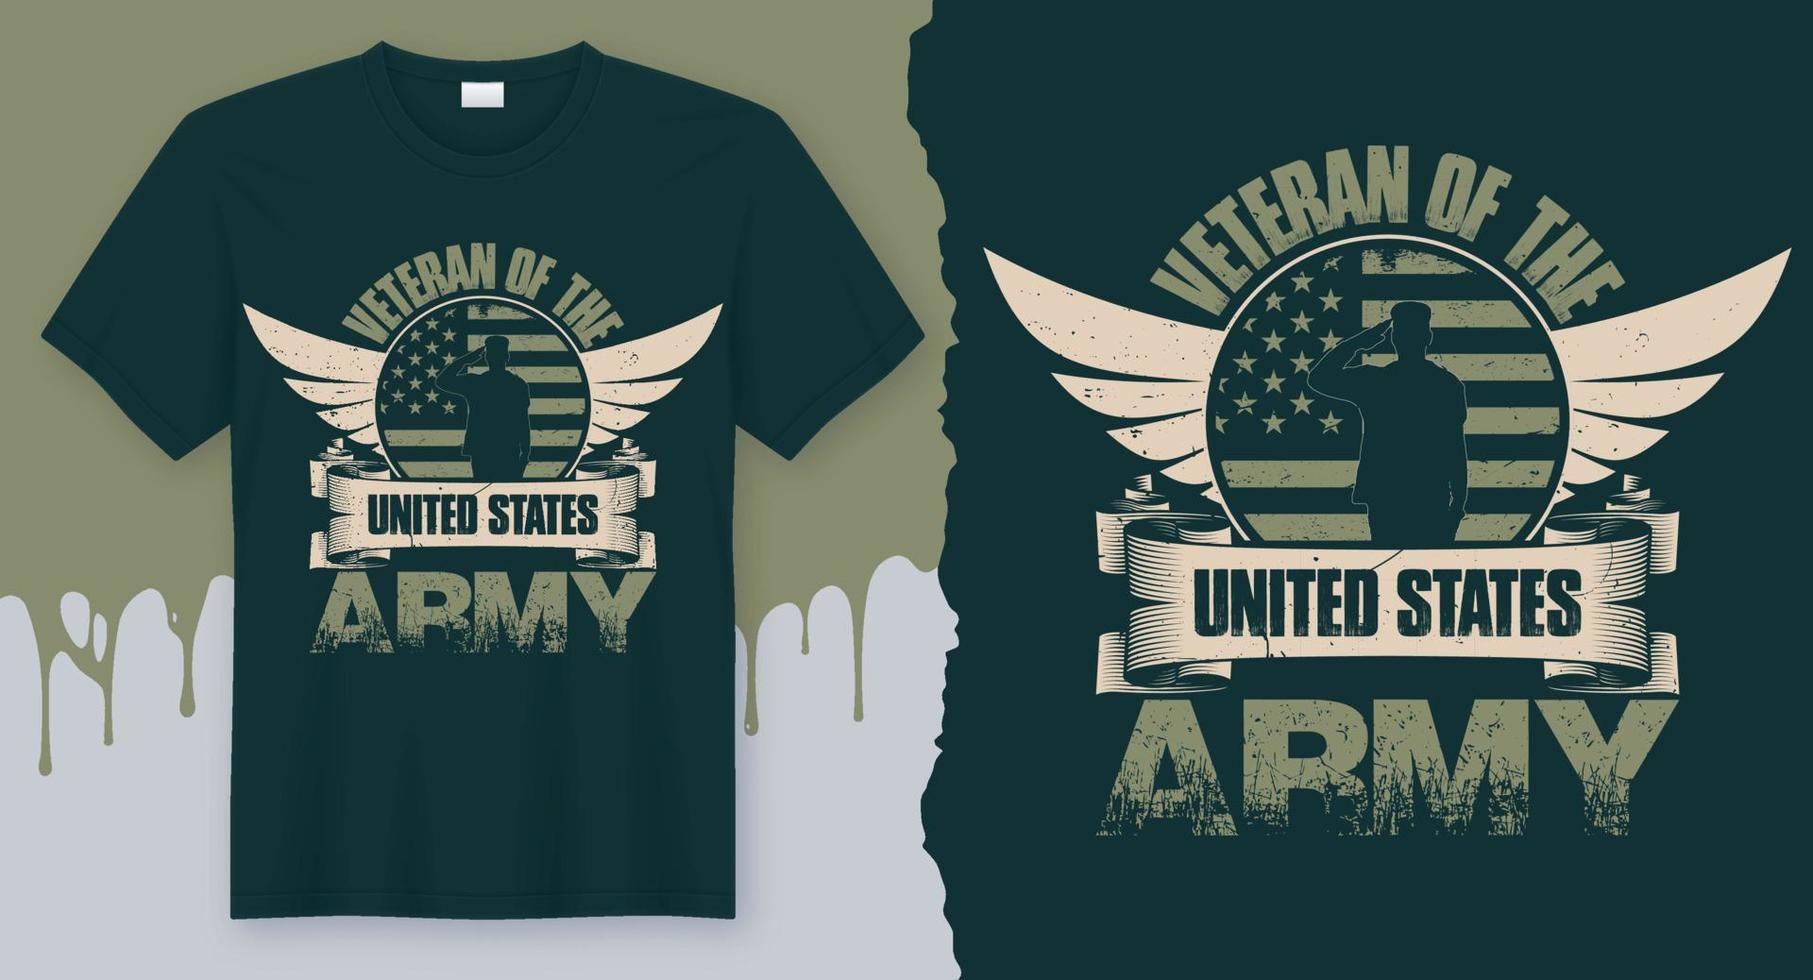 Veteran Of The United States Army. Best Veteran Design for gift cards, banners, vectors, t-shirts, posters, print, etc vector